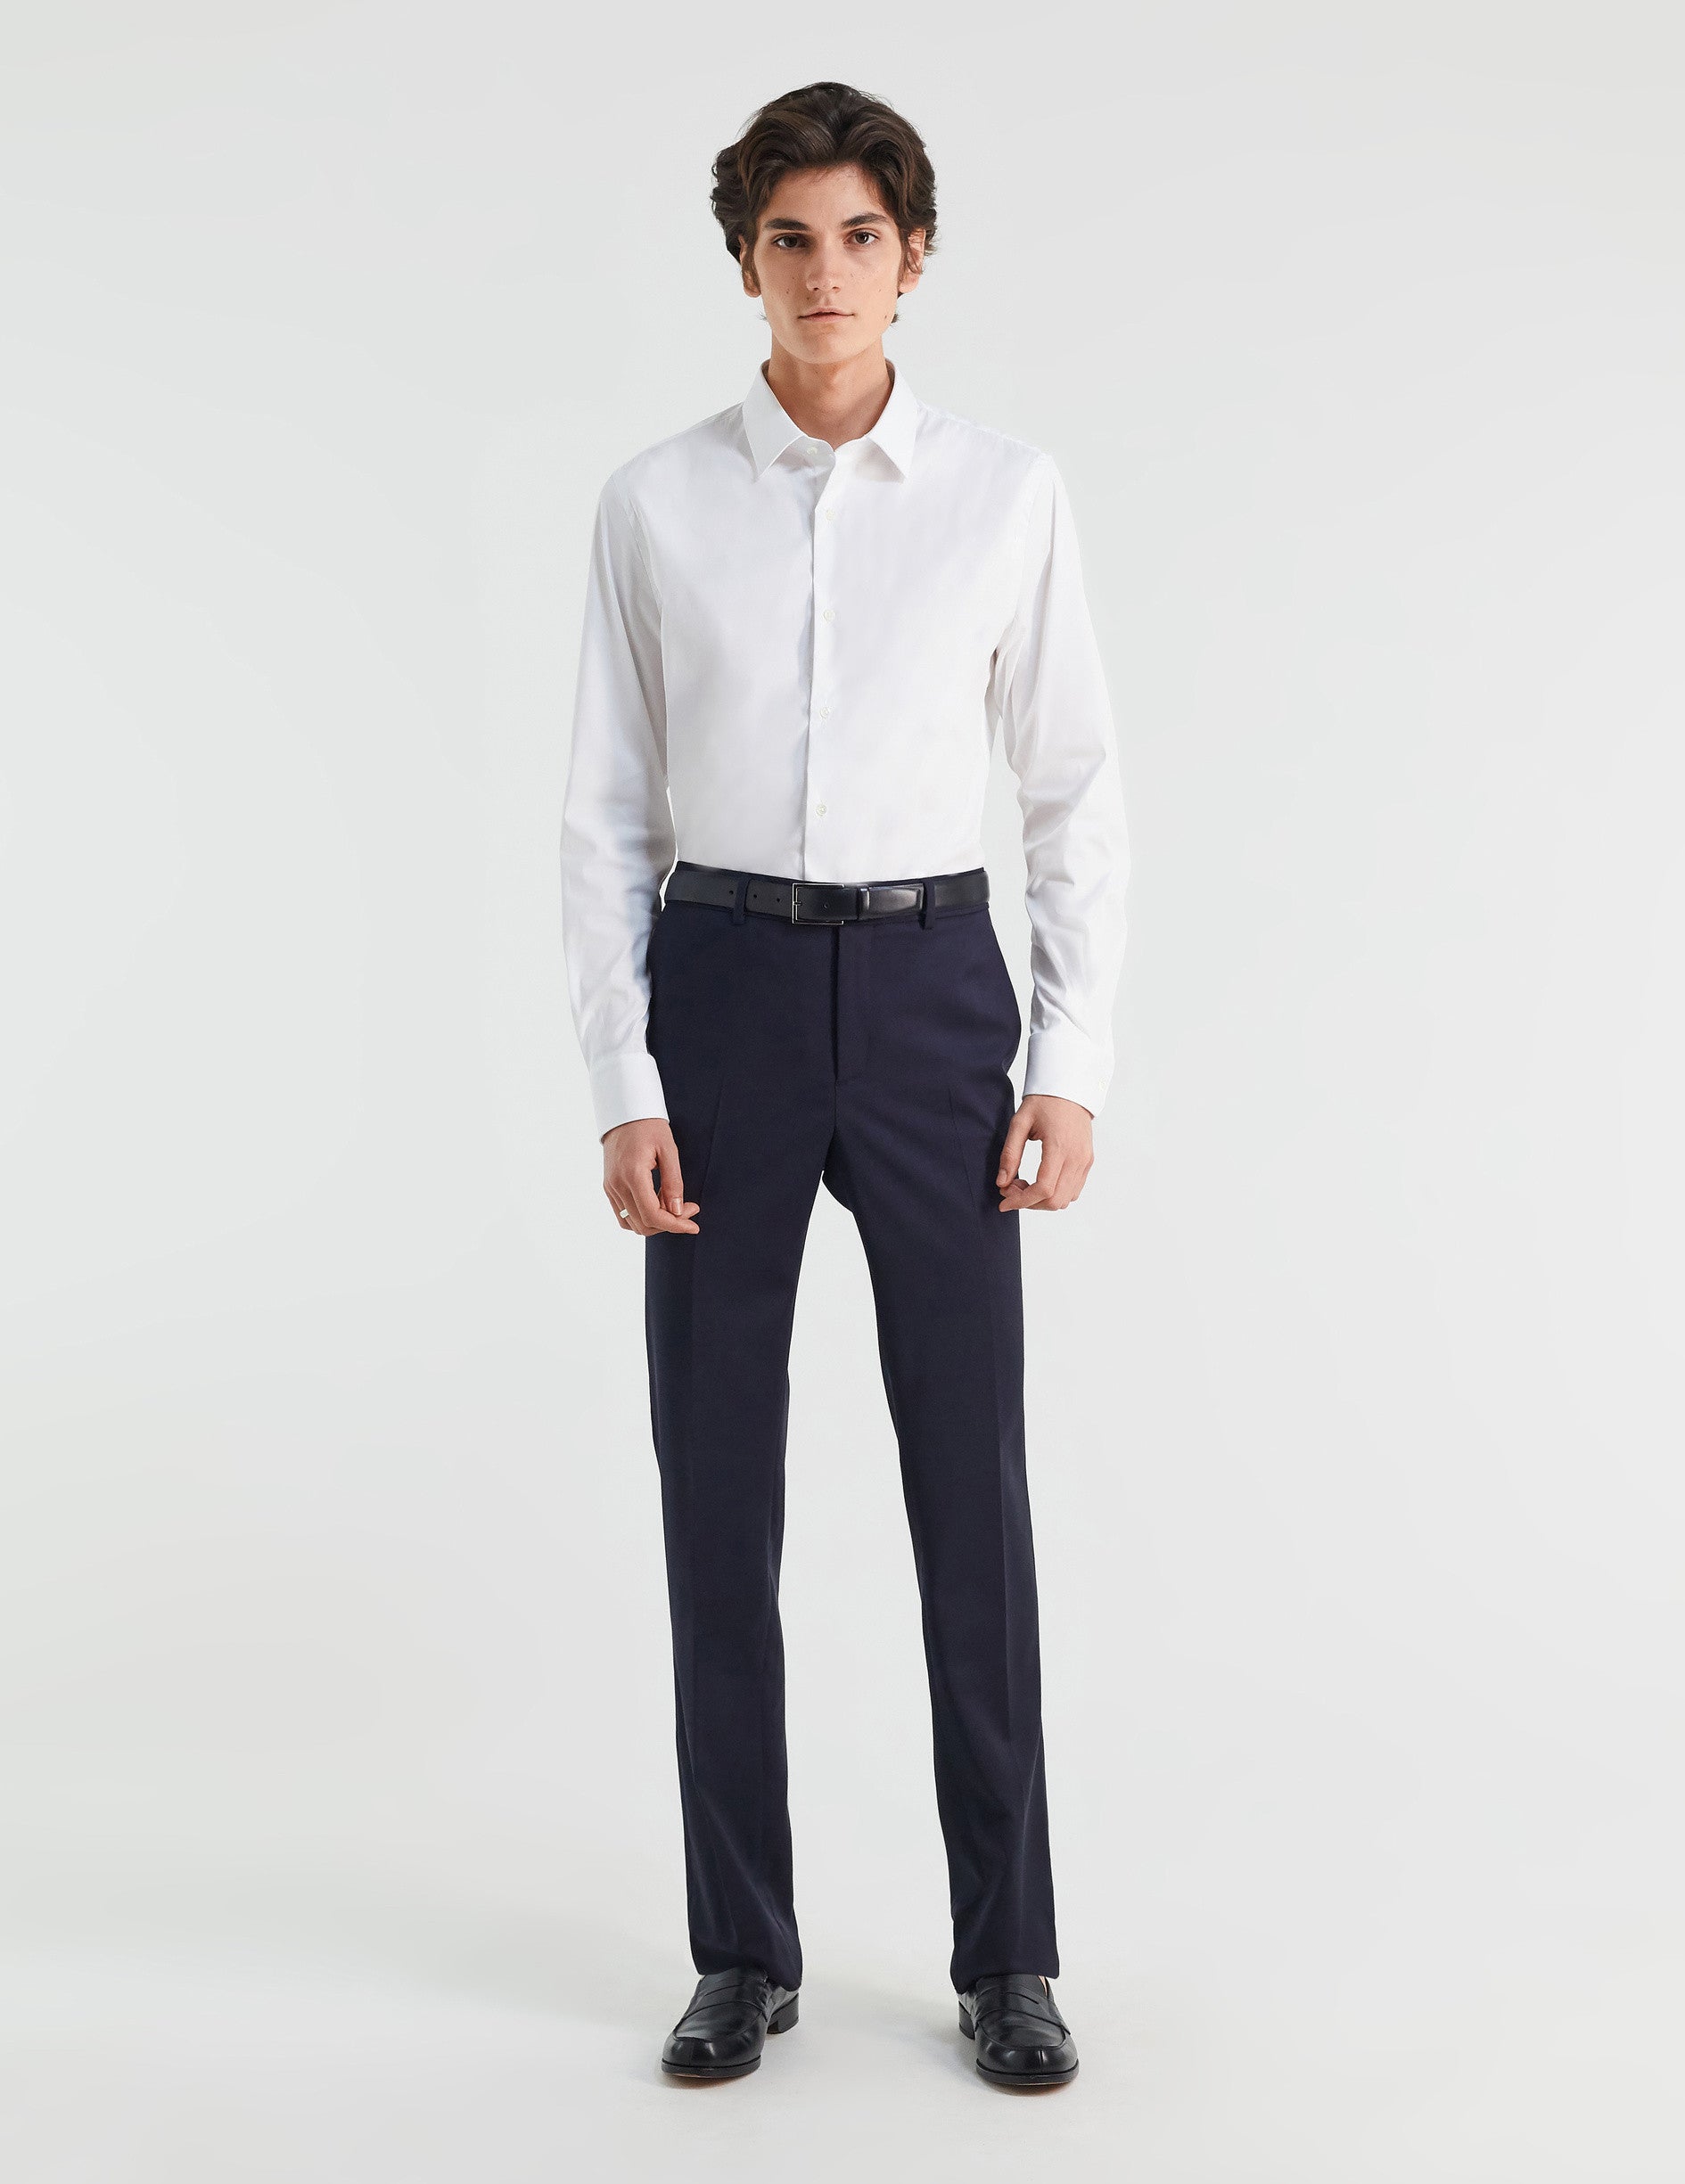 Fitted white stretch shirt - Poplin - Figaret Collar